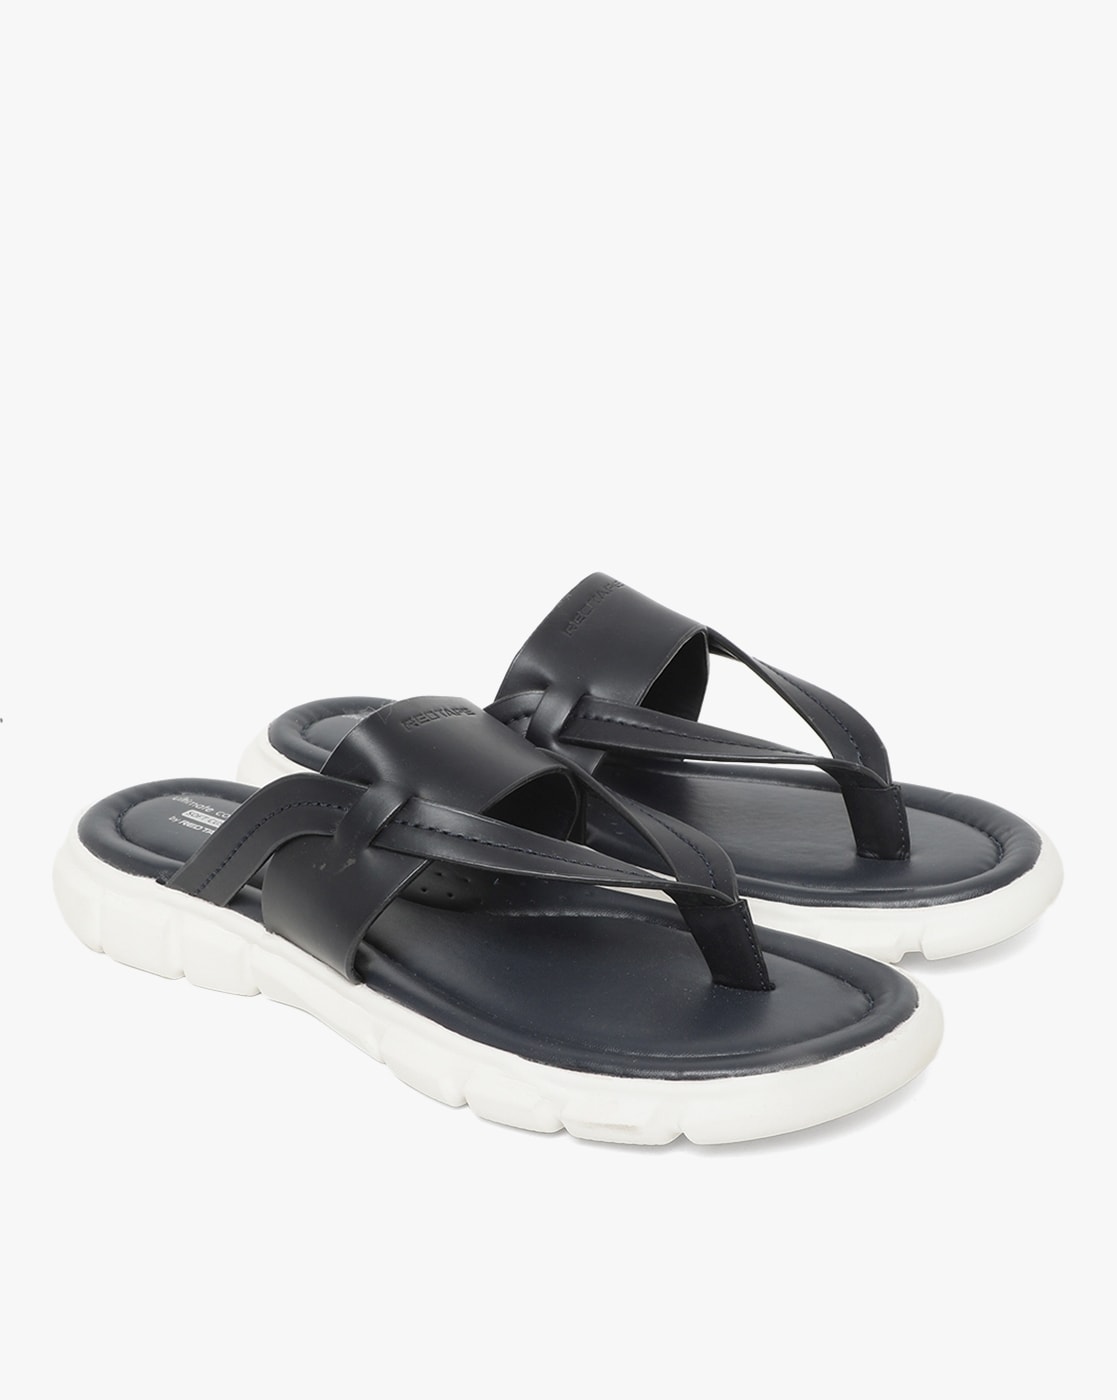 Navy blue thong sandals + FREE SHIPPING | Zappos.com